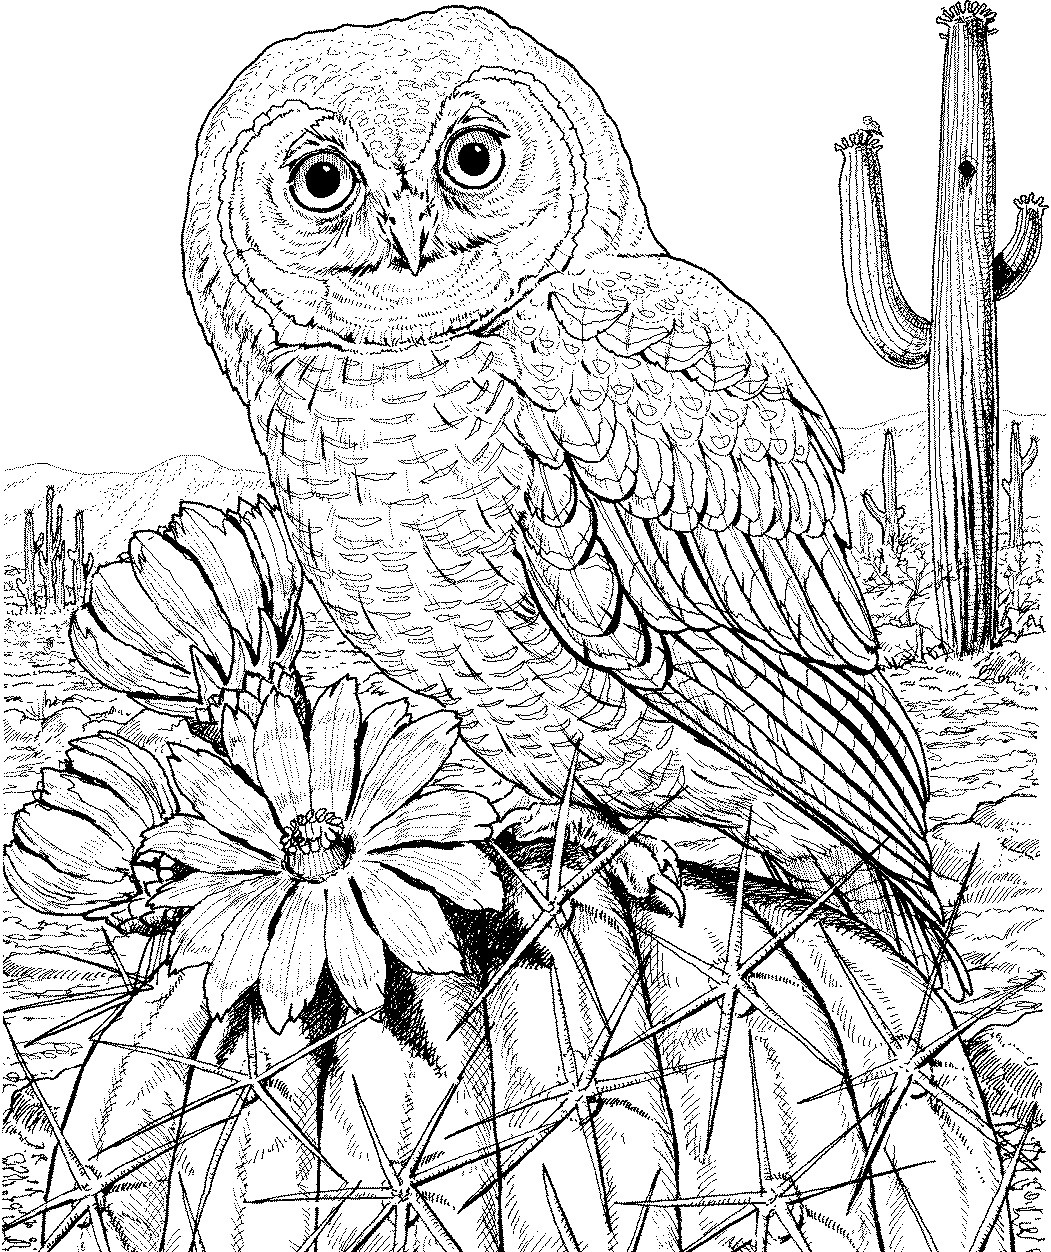 Owl Adult Coloring Pages
 10 Difficult Owl Coloring Page For Adults